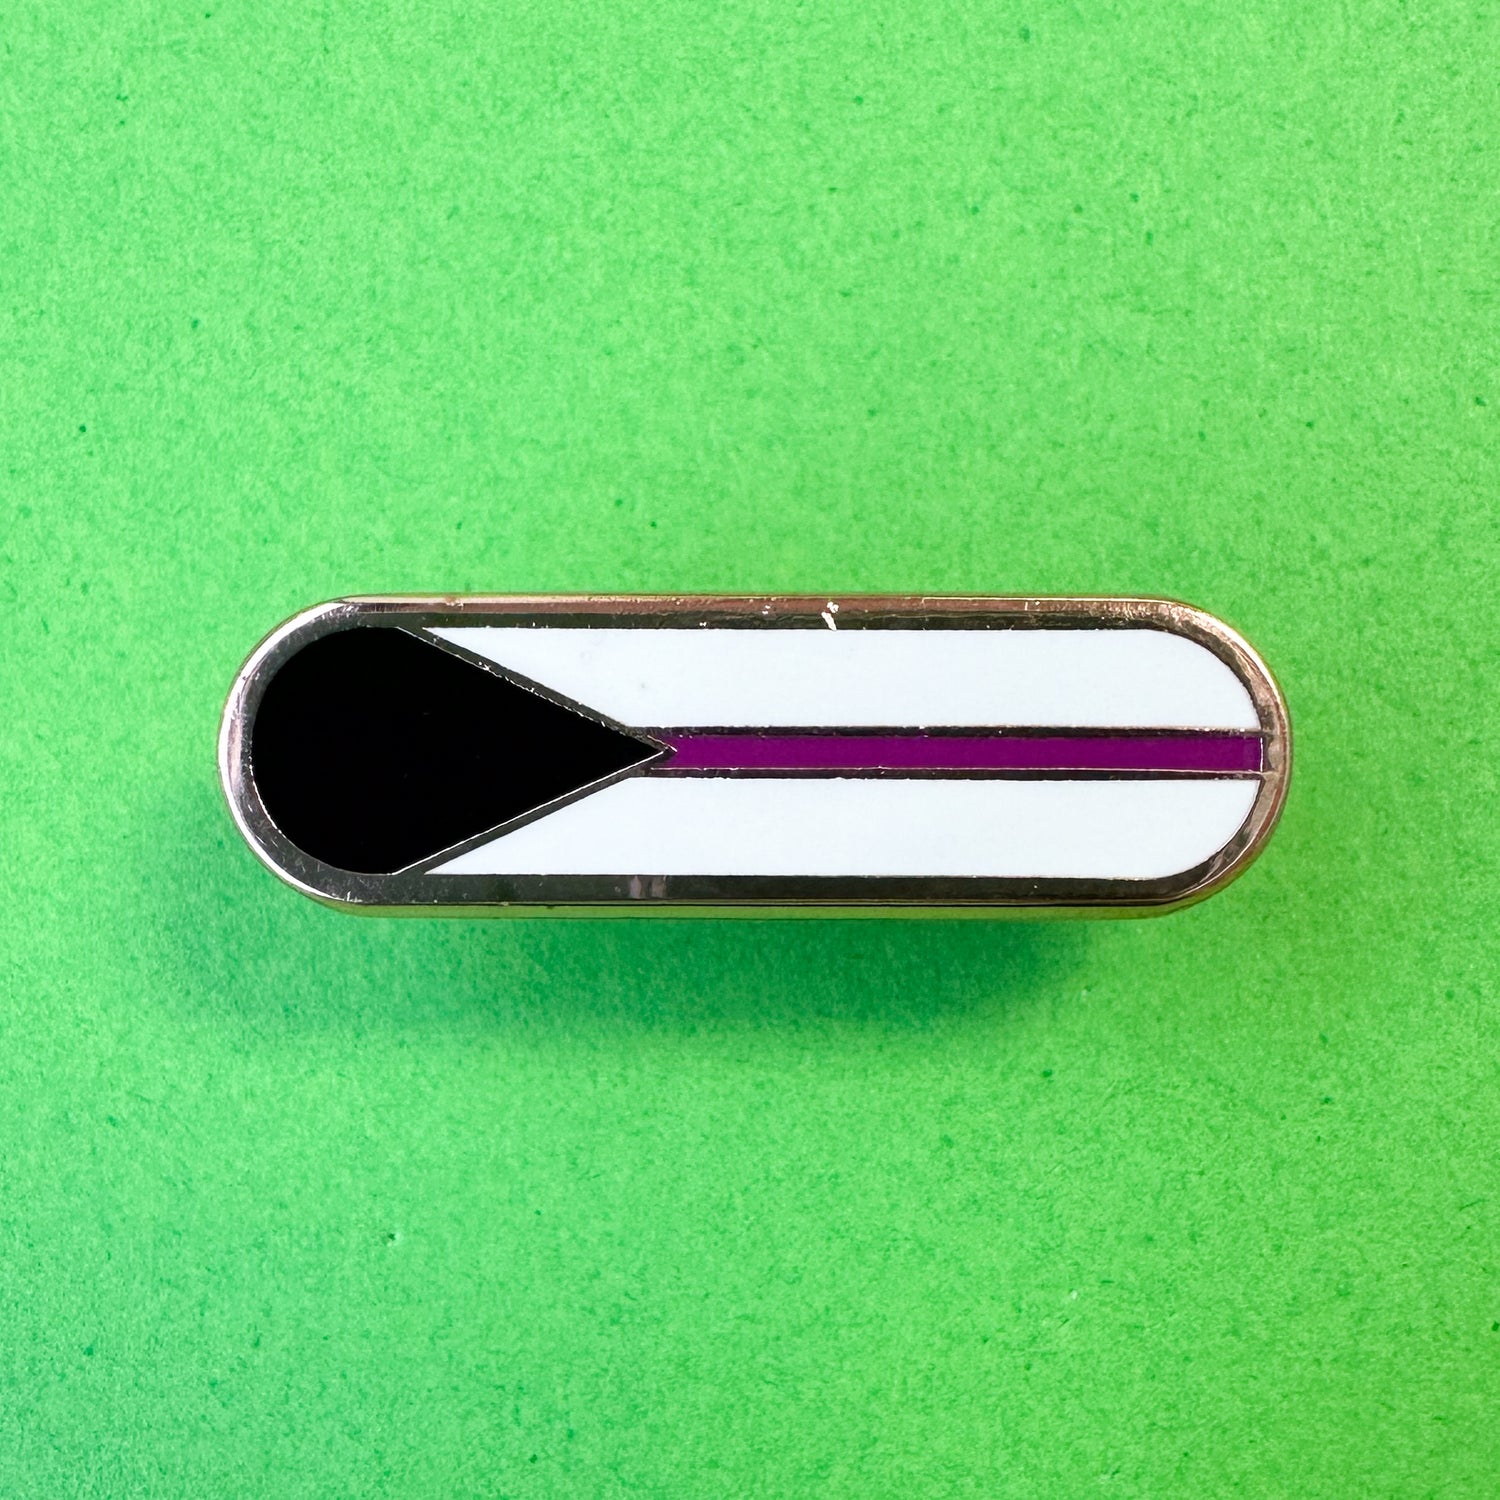 A bandaid with the elements of the Demisexual pride flag on it, a black triangle, purple stripe and white background. The pin is on a green background.